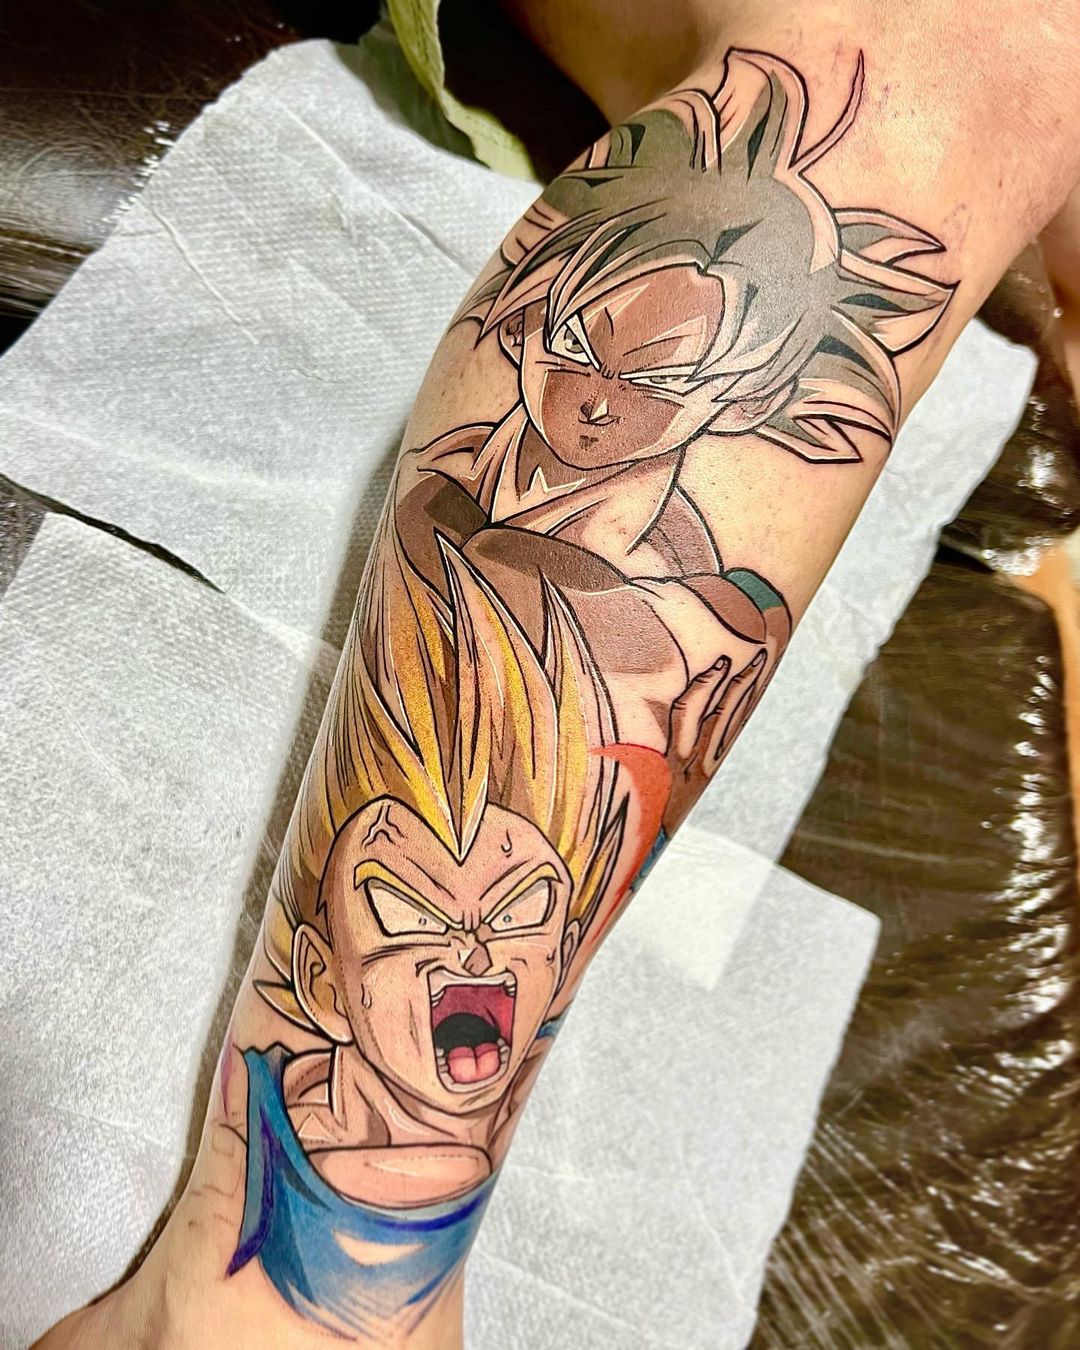 Tattoo uploaded by Justin JP Param  Forgot to post this one Always down  for more dragon ball tattoos or any other cool anime Down to do some  street fighter or marvel